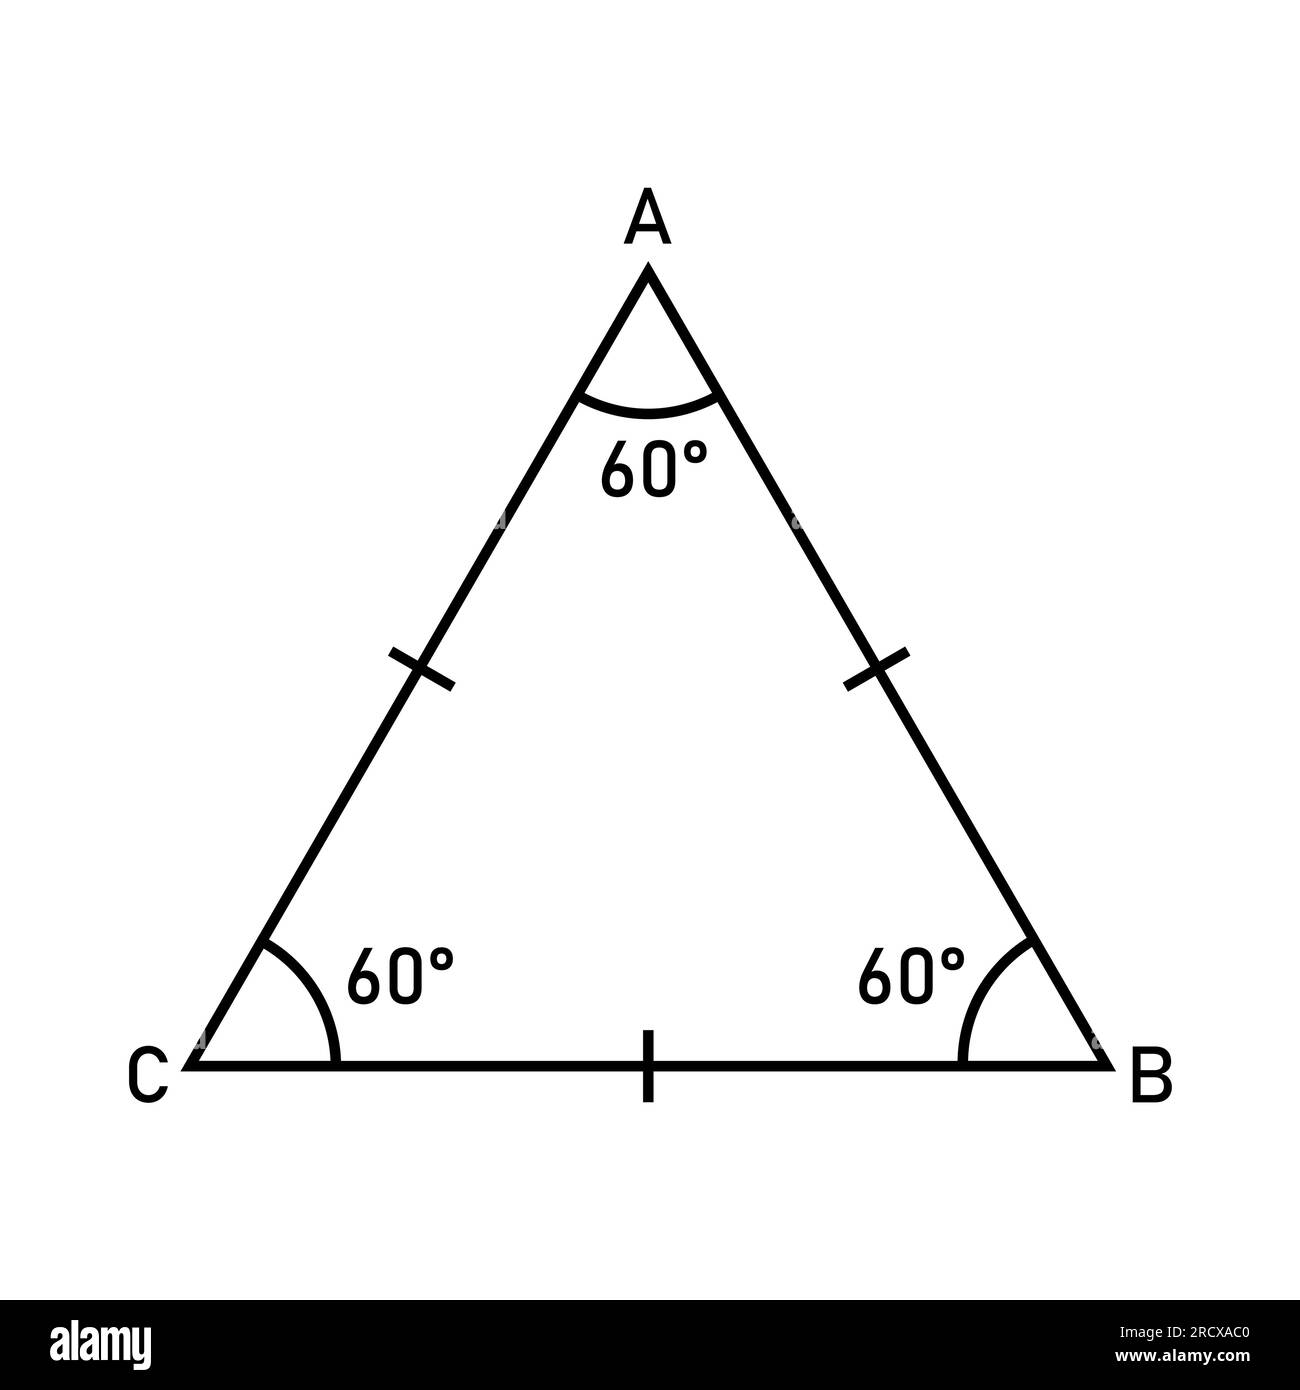 Properties of equilateral triangle in mathematics. Three sides with same length. Geometric shape. Vector illustration isolated on white background. Stock Vector